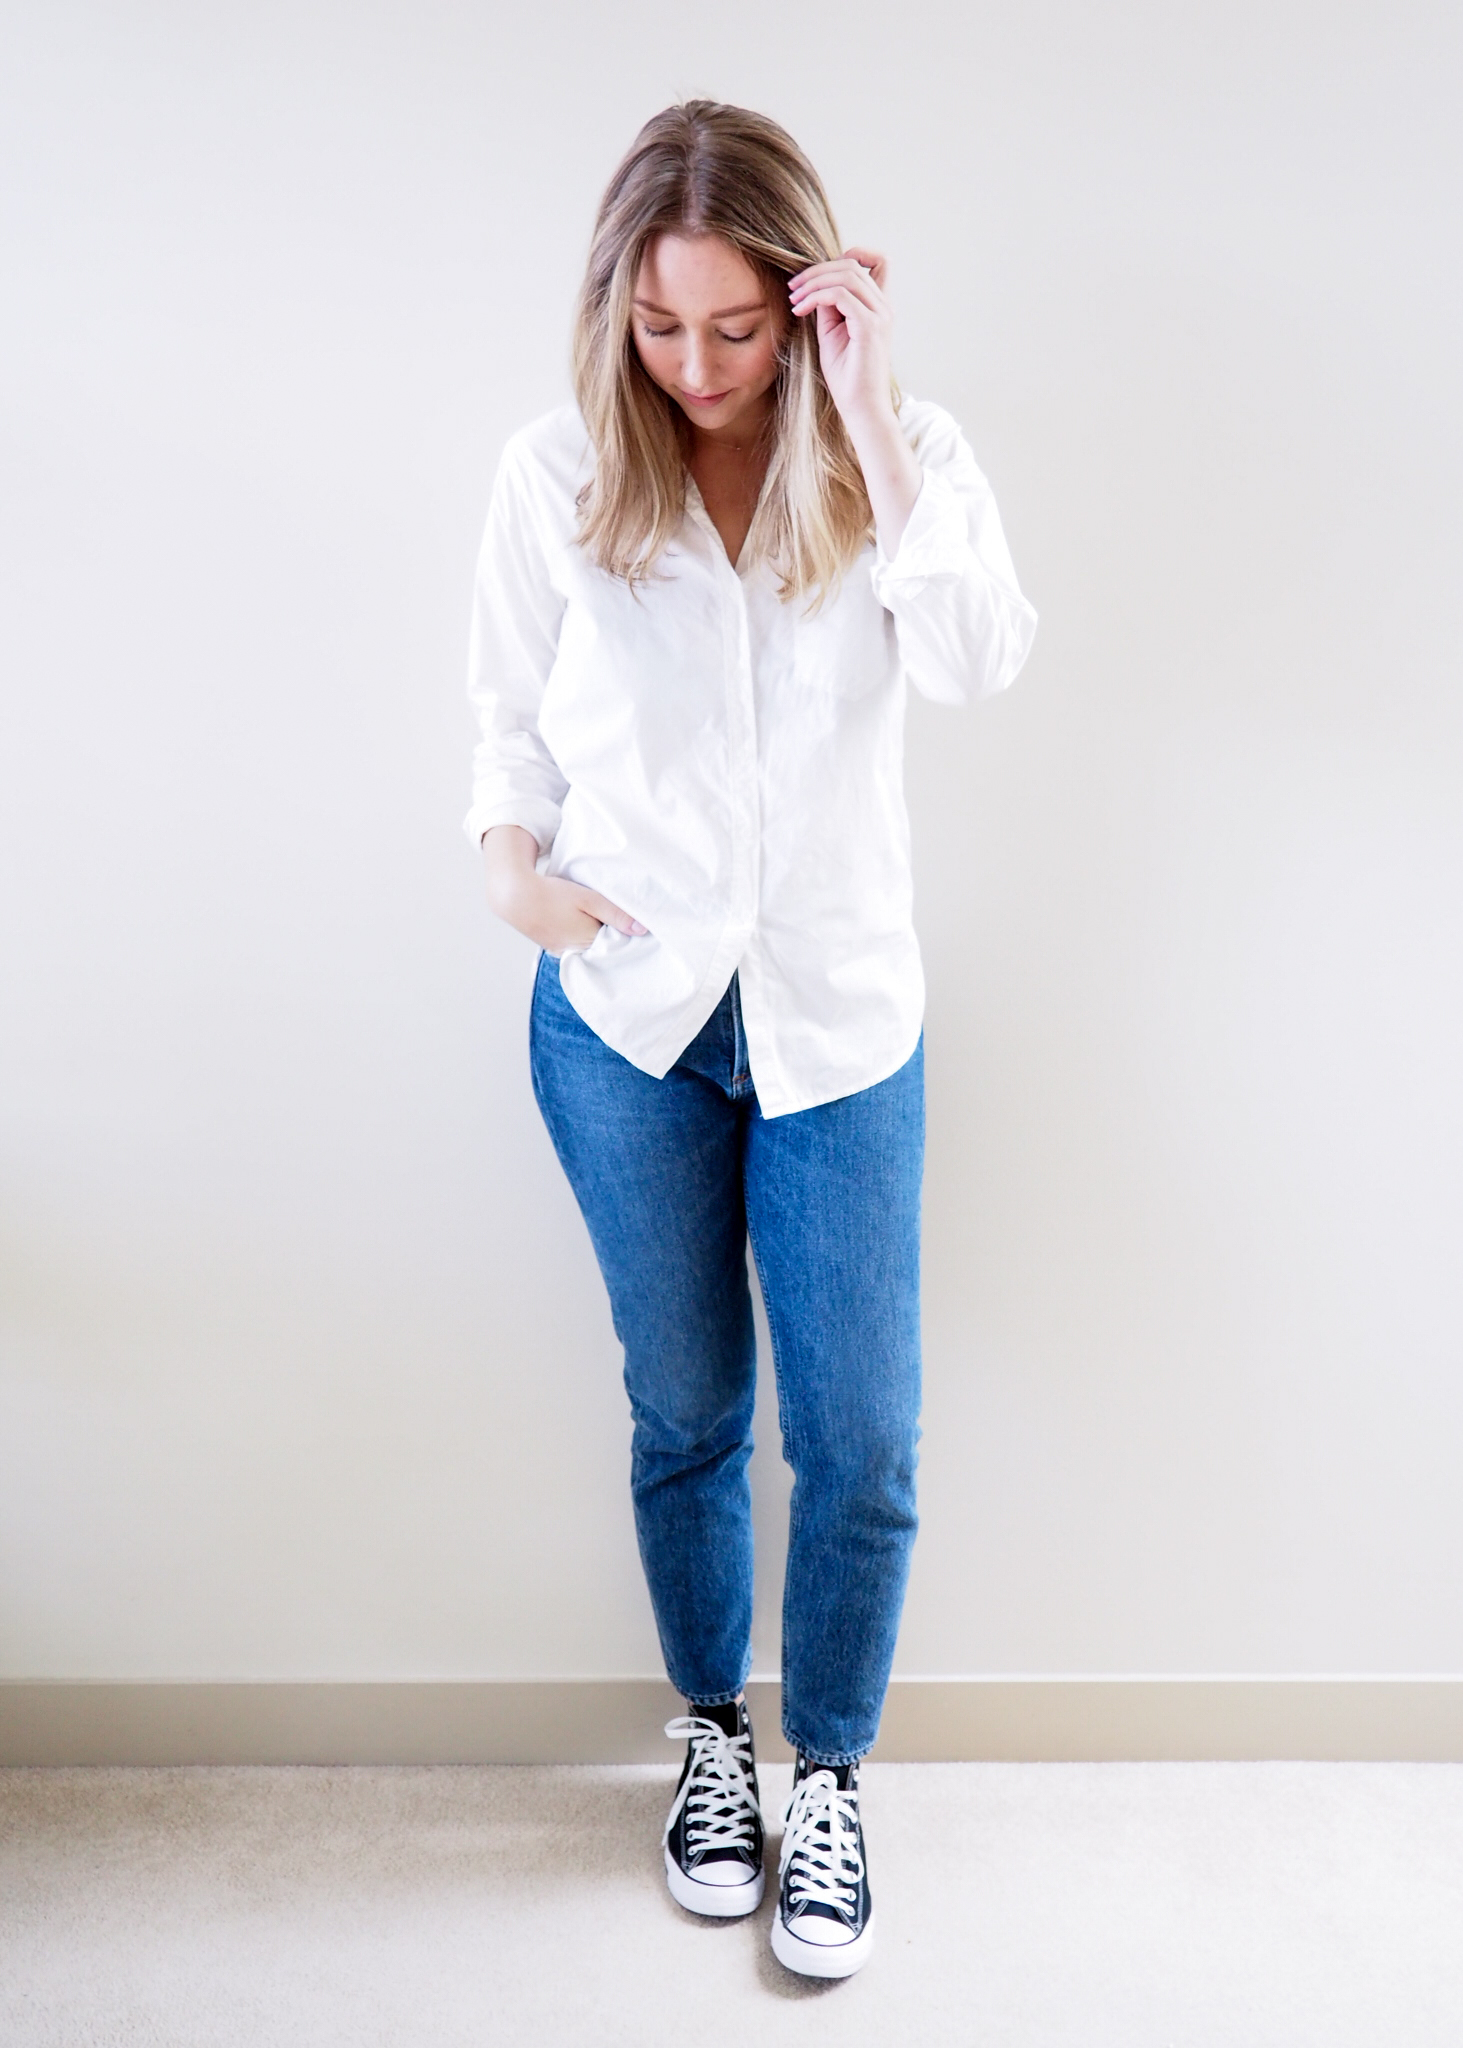  How to Style a Classic Button-Down Shirt